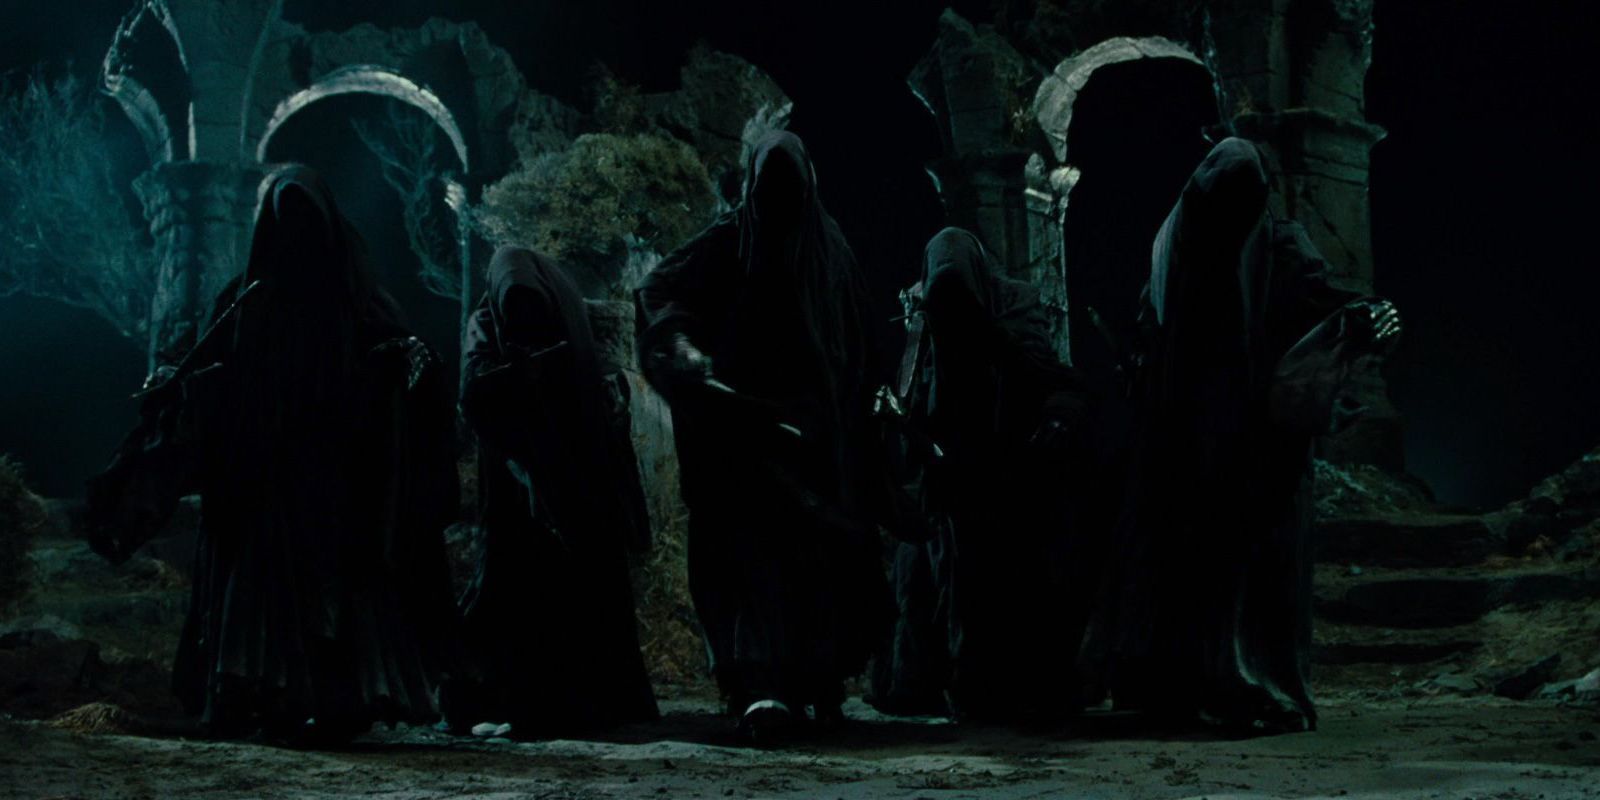 The Nazgul on Weathertop in Lord of the Rings